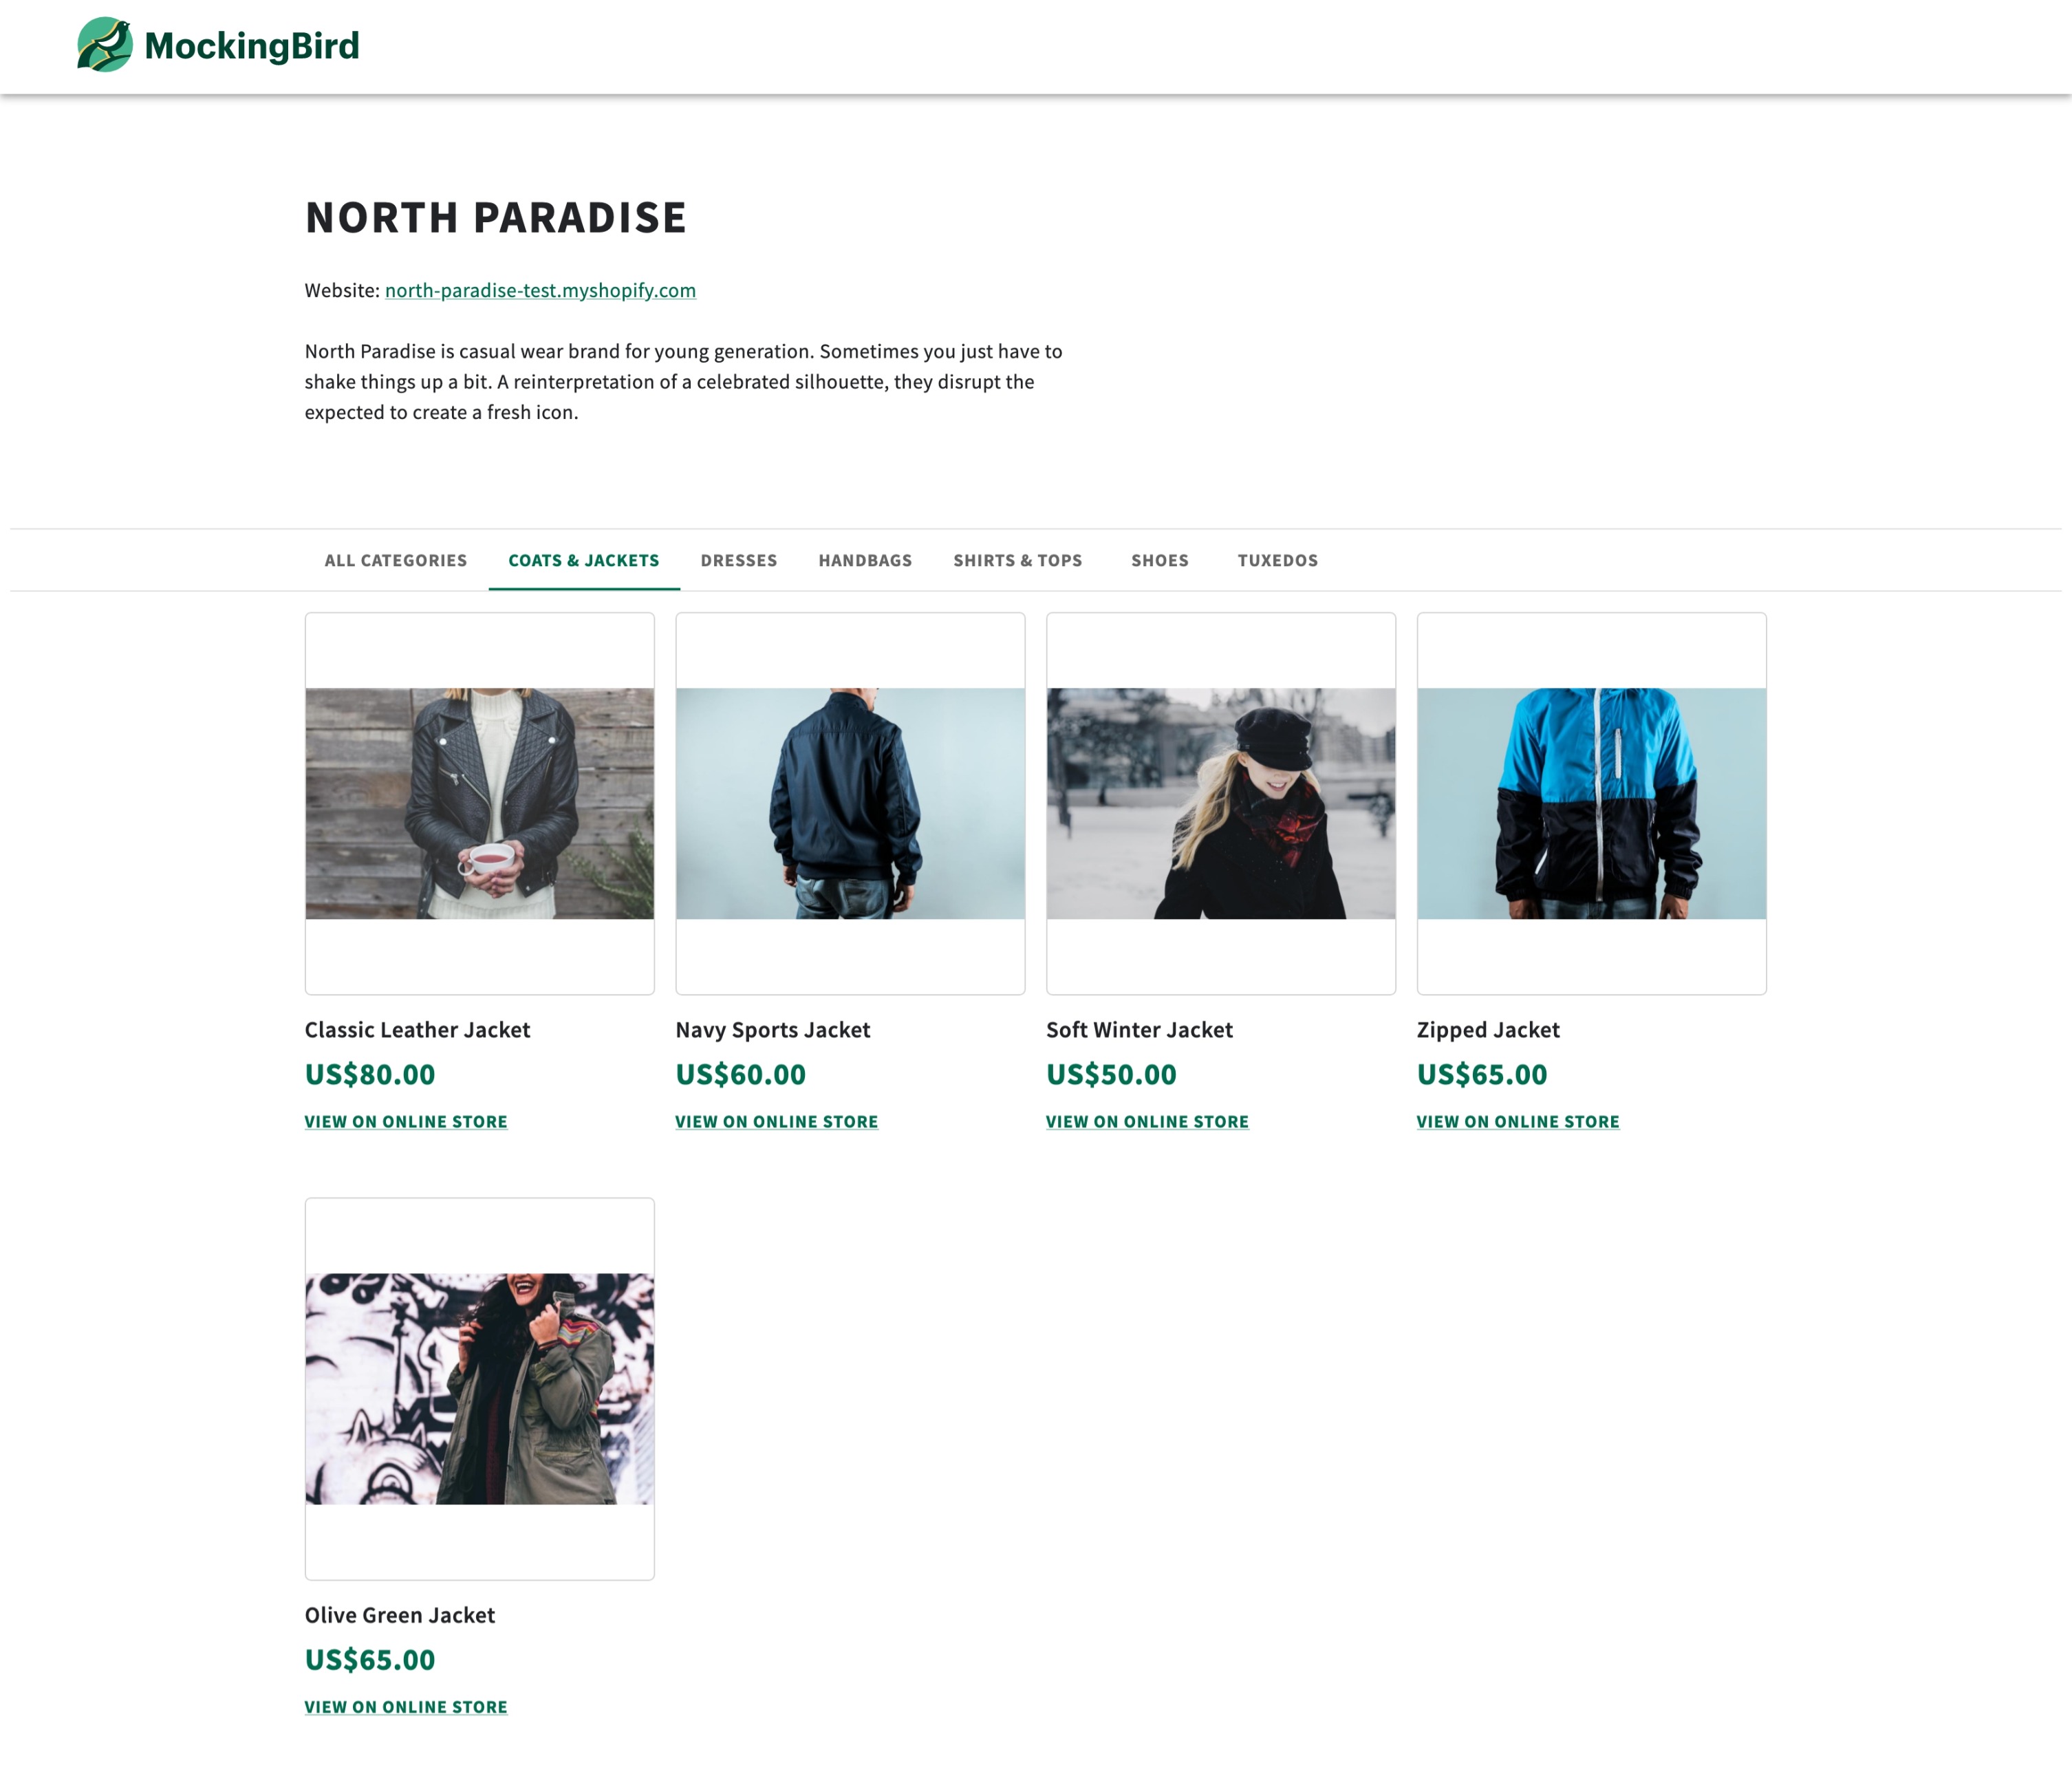 An image of the shop page with a product category selected